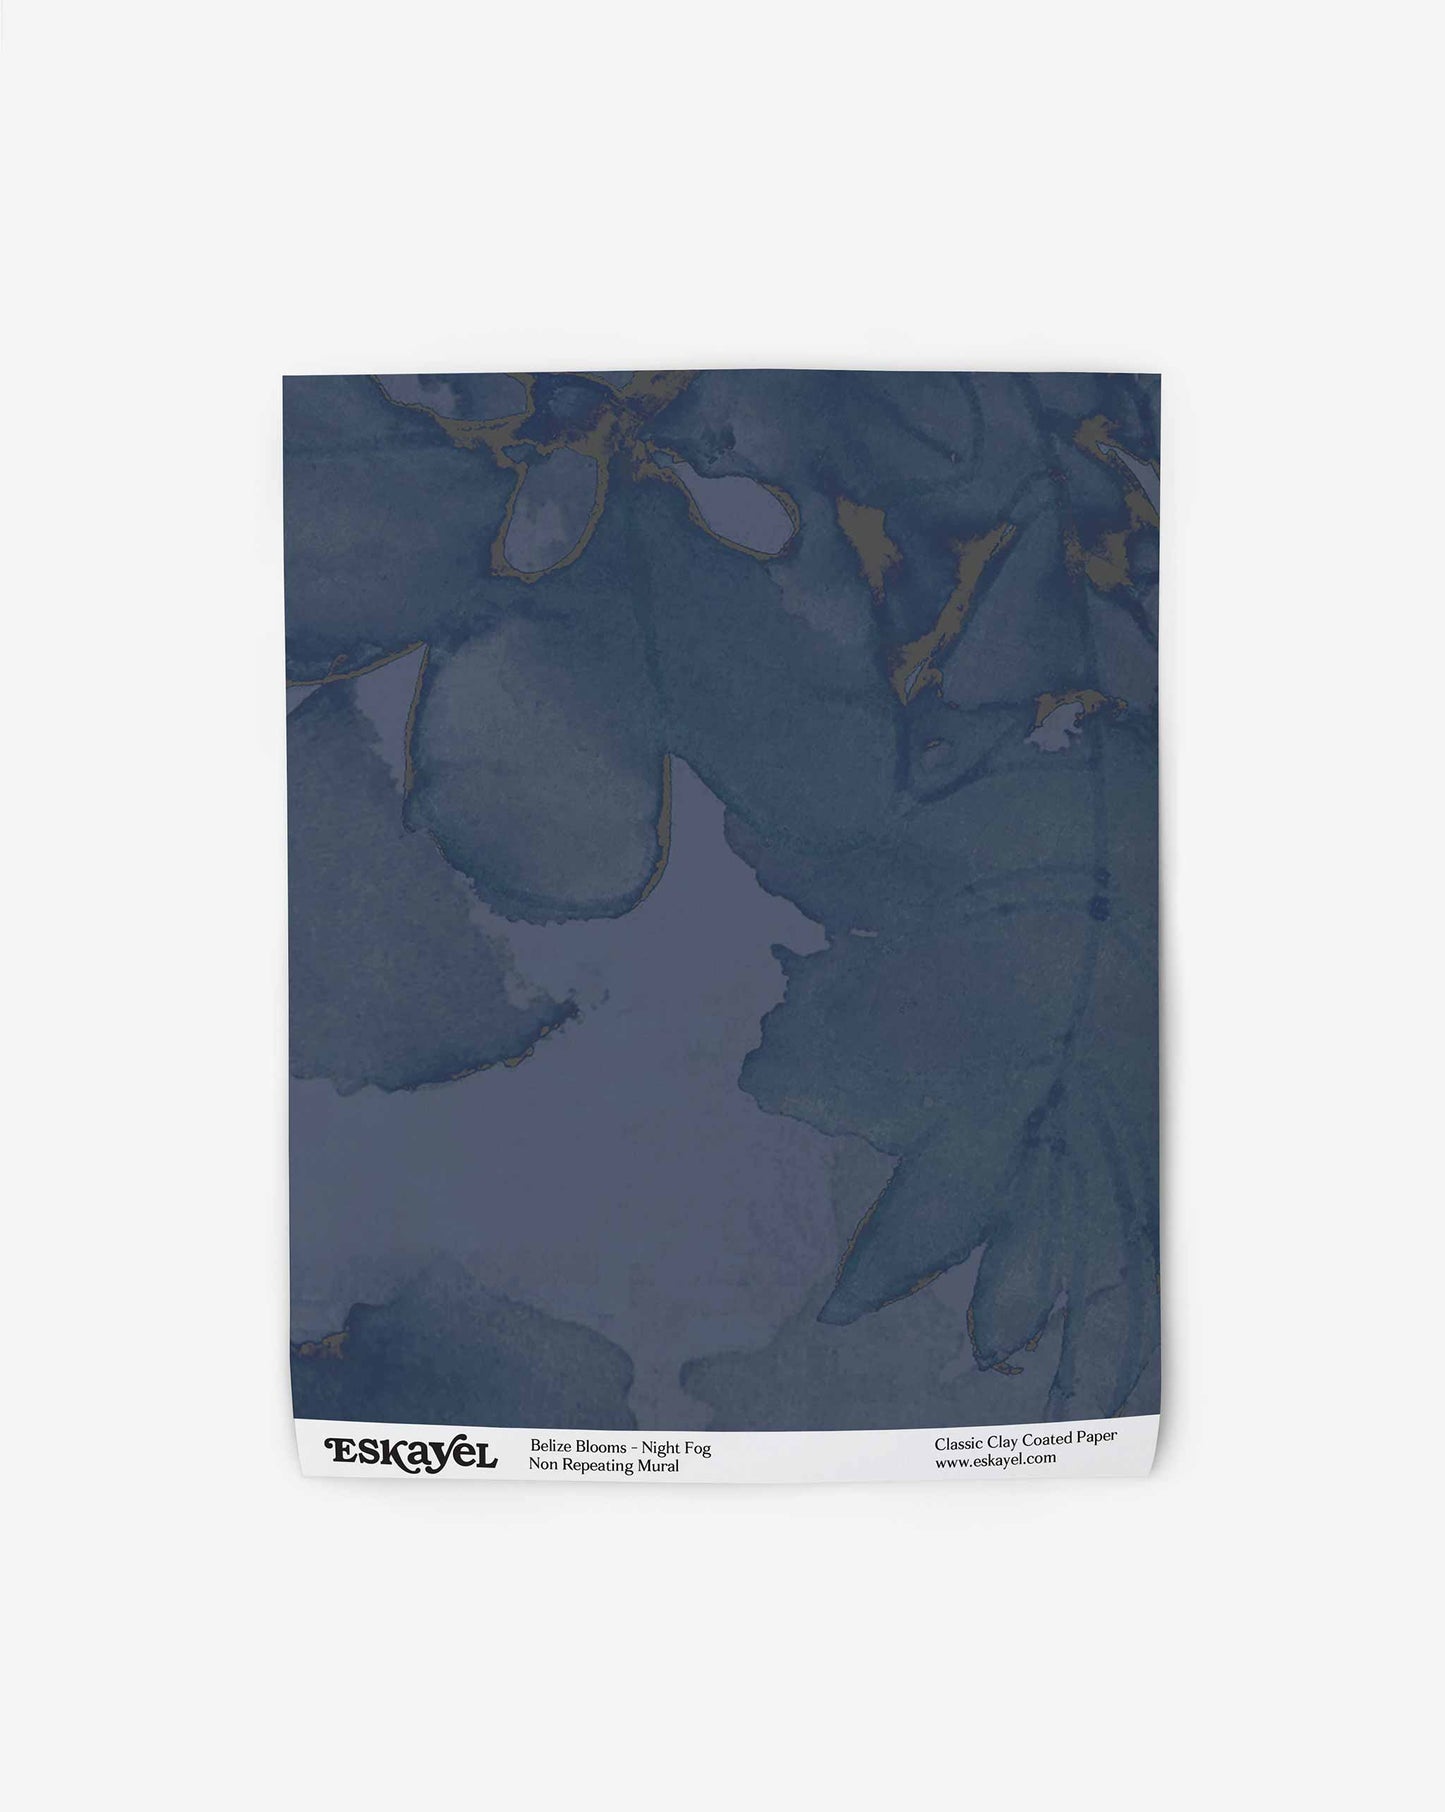 A sample of Belize Blooms Wallpaper Mural||Night Fog featuring a classic blue-gray colored pattern with subtle floral outlines, displayed on a plain background with the brand’s logo at the bottom.